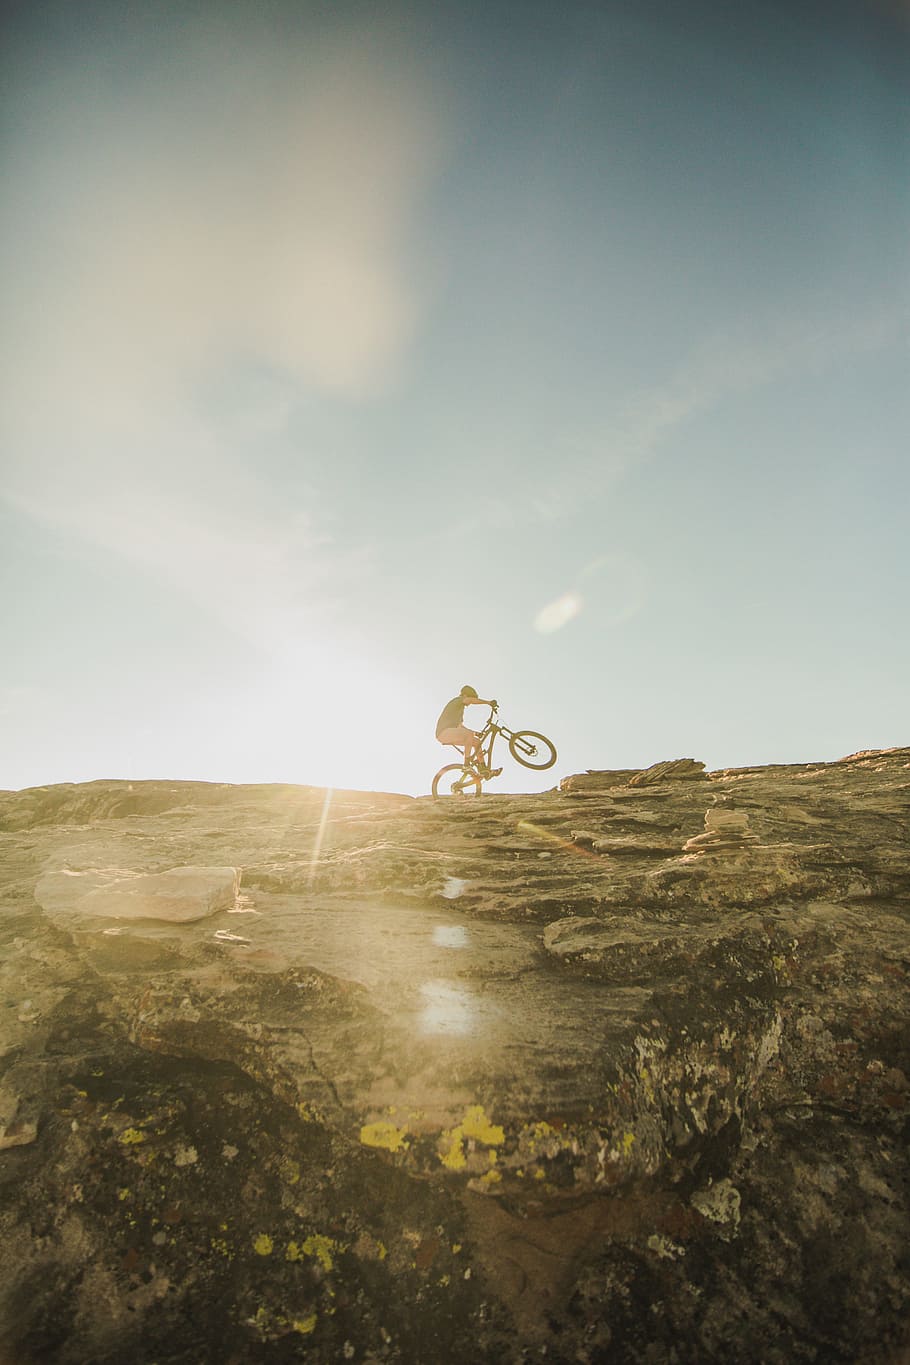 person riding on bicycle, man cycling on mountain, bike, stone, HD wallpaper